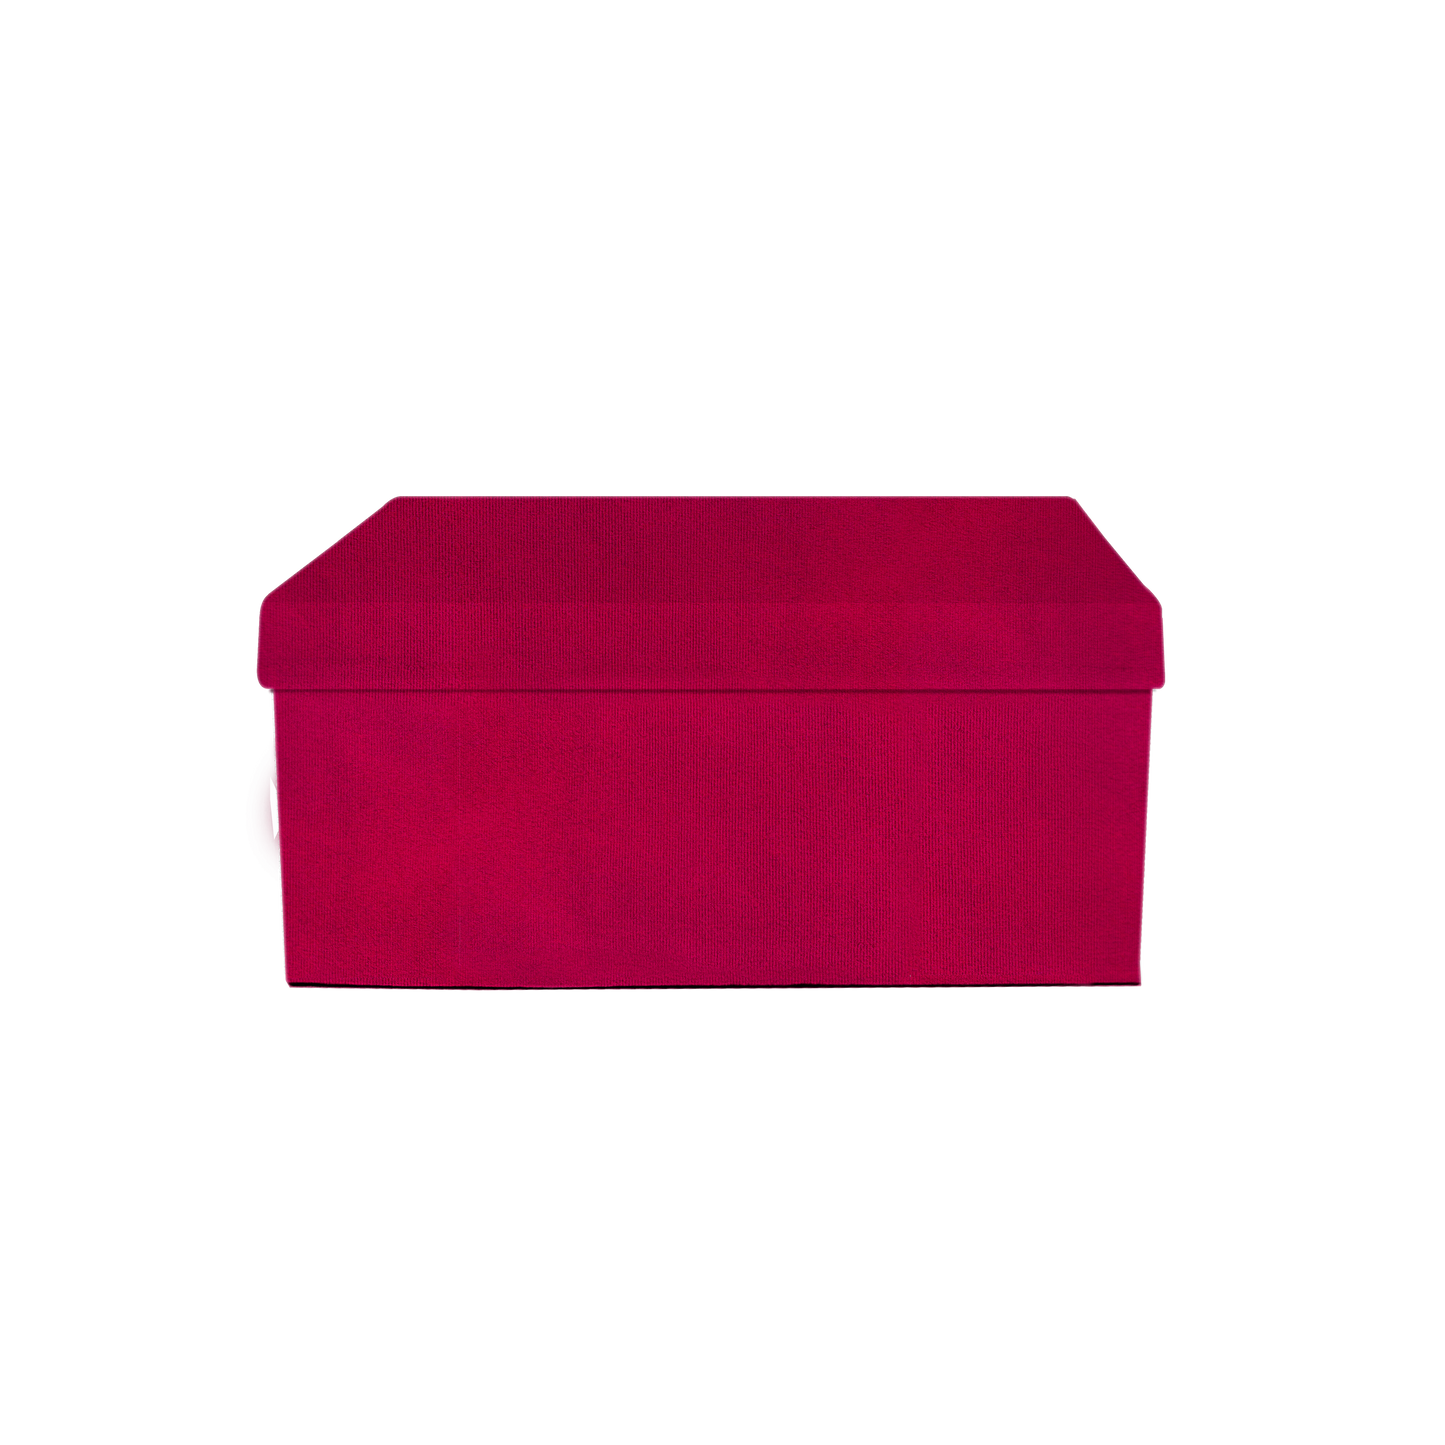 Kit 3 different sizes rectangular shape boxes 3 in 1 - Suede Fucsia